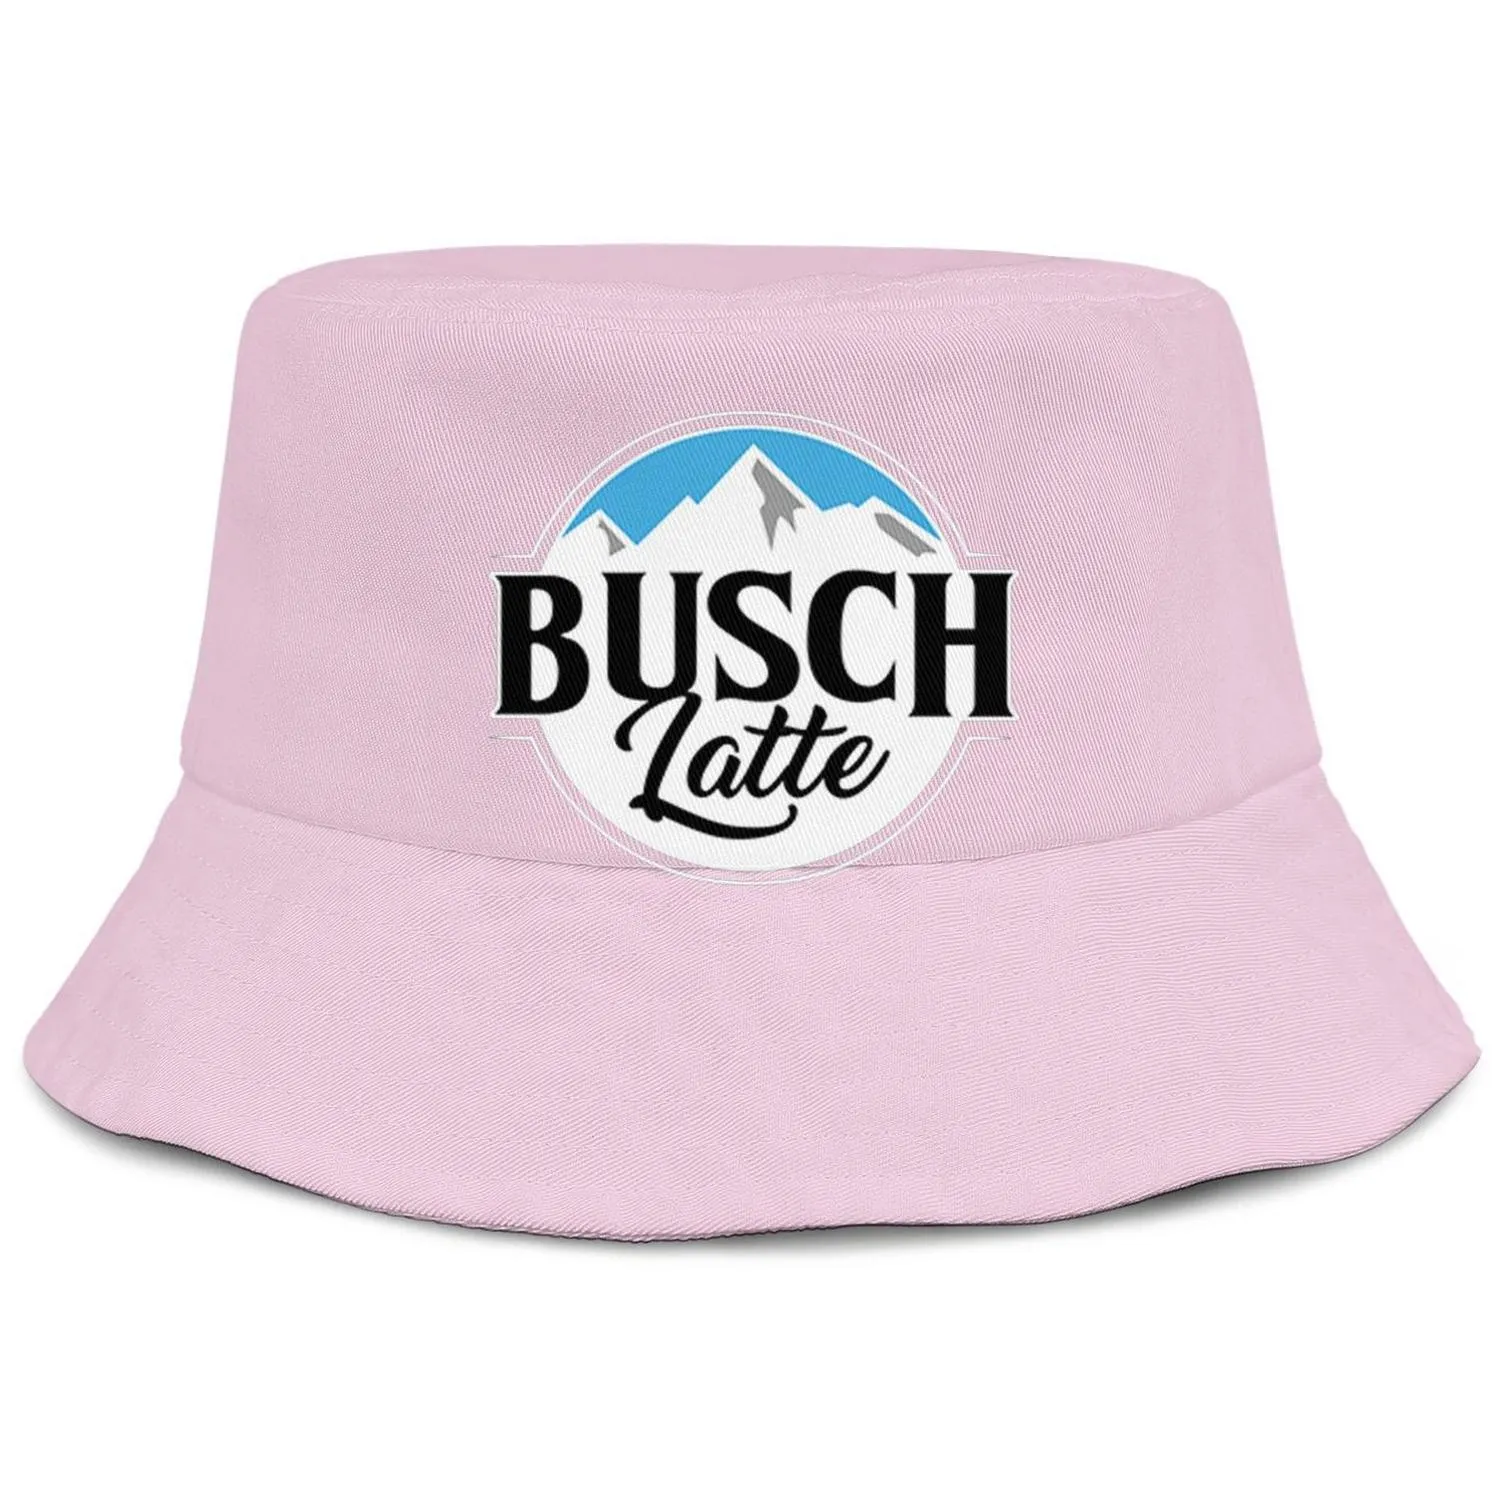 Busch Light Beer logo mens and womens buckethat cool youth bucket baseballcap light blue adge white Latte So Much4927700